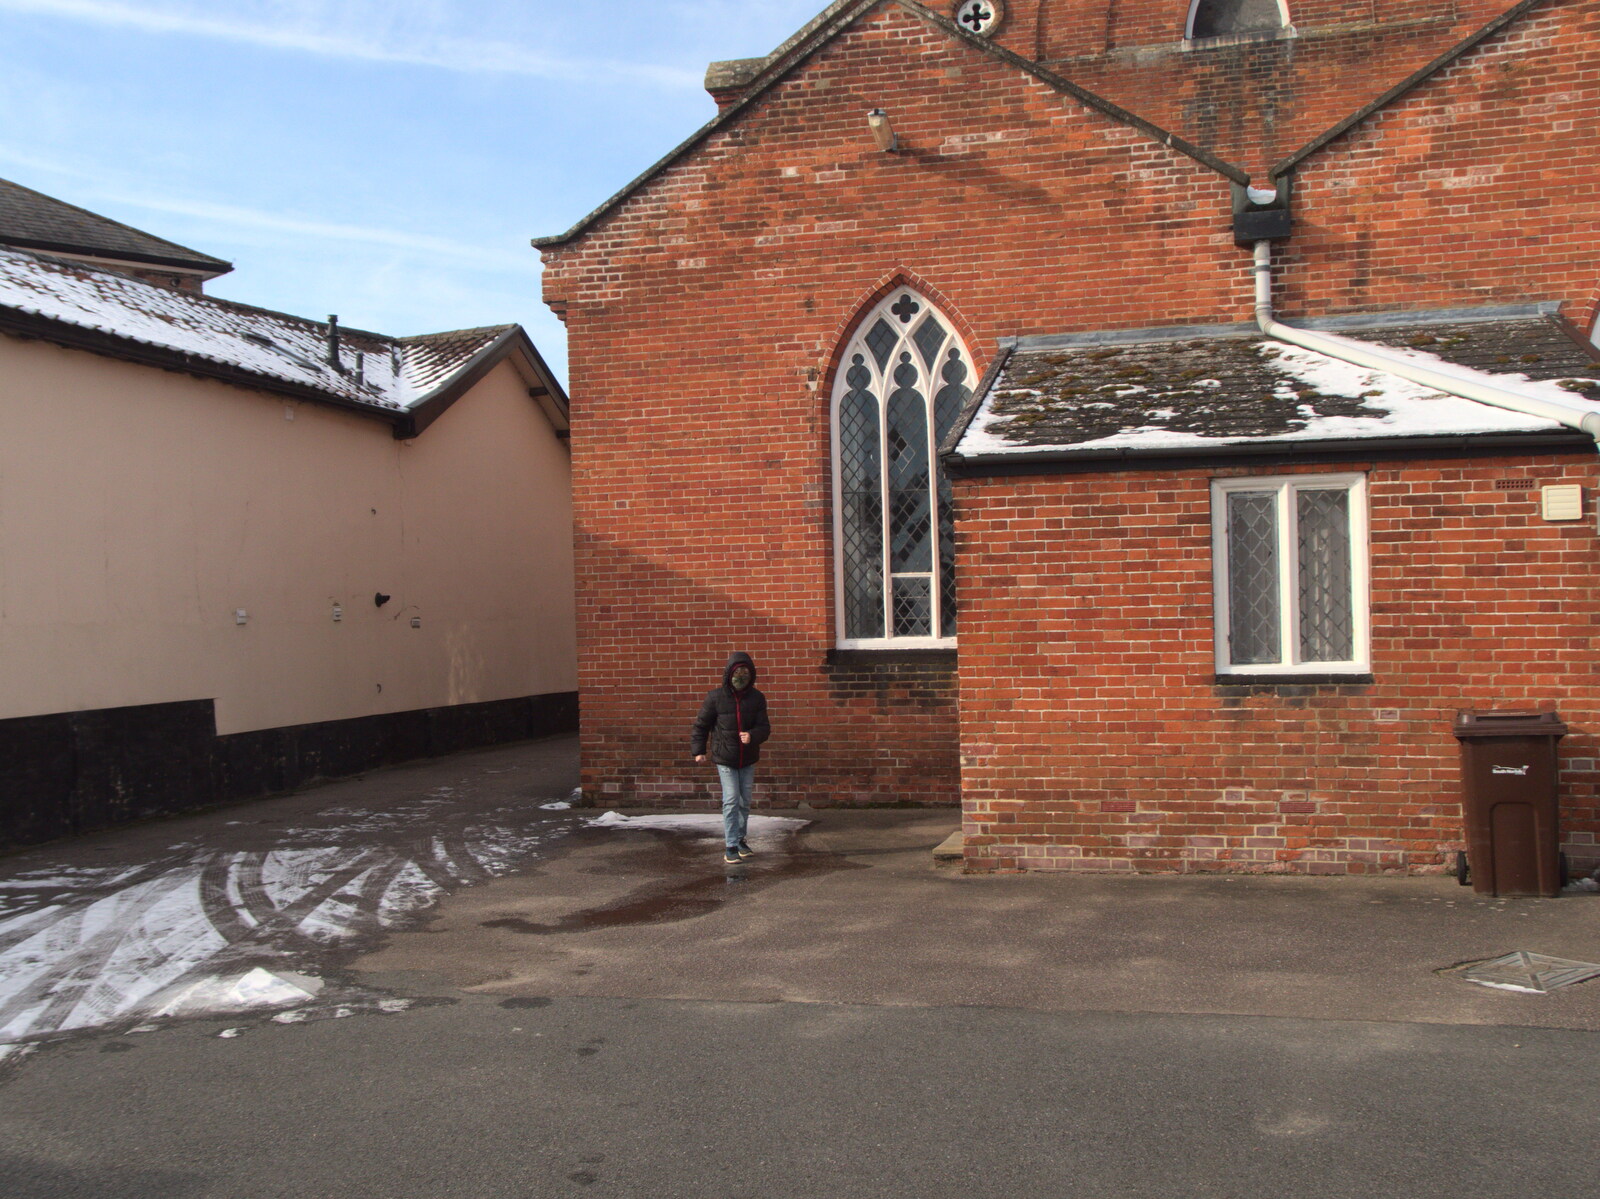 Fred roams about behind the United Reform Church from Derelict Infants School and Ice Sculptures, Diss and Palgrave, Norfolk and Suffolk - 13th February 2021